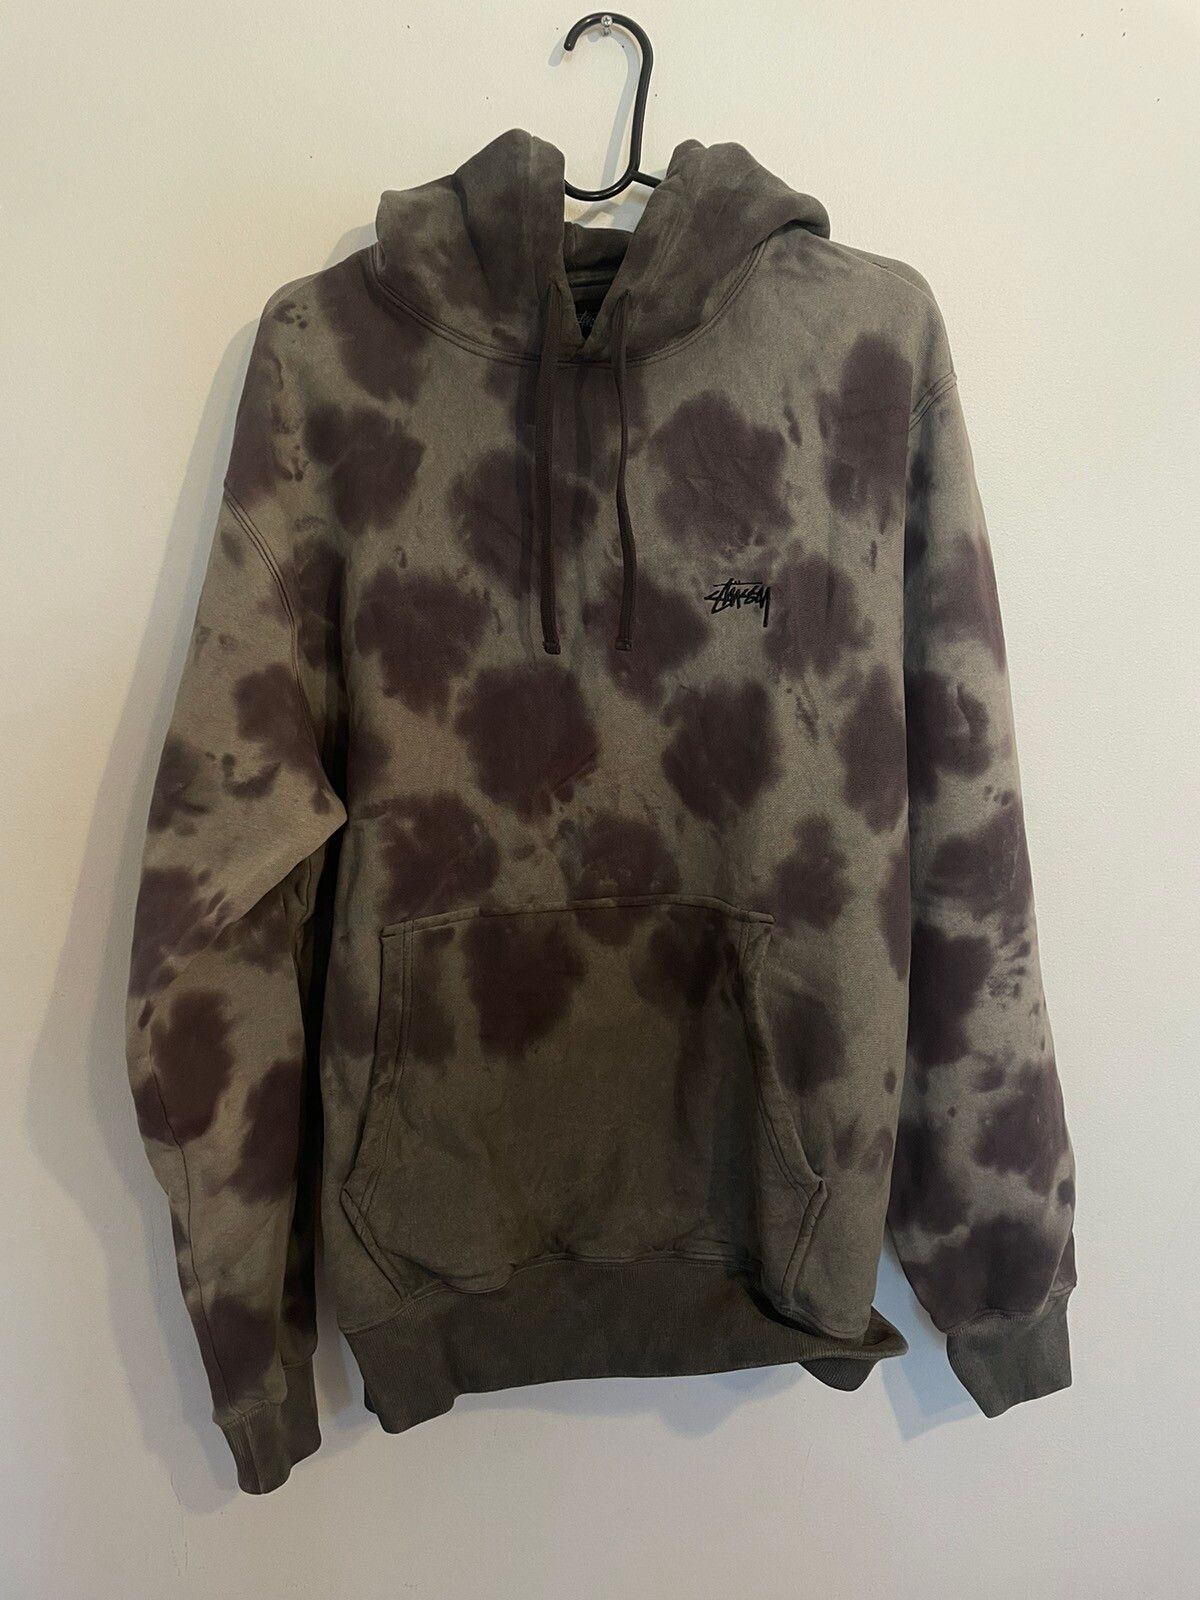 Stussy Stussy Garment Dyed Washed Hoodie Sweatshirt Size Large Size US L / EU 52-54 / 3 - 1 Preview